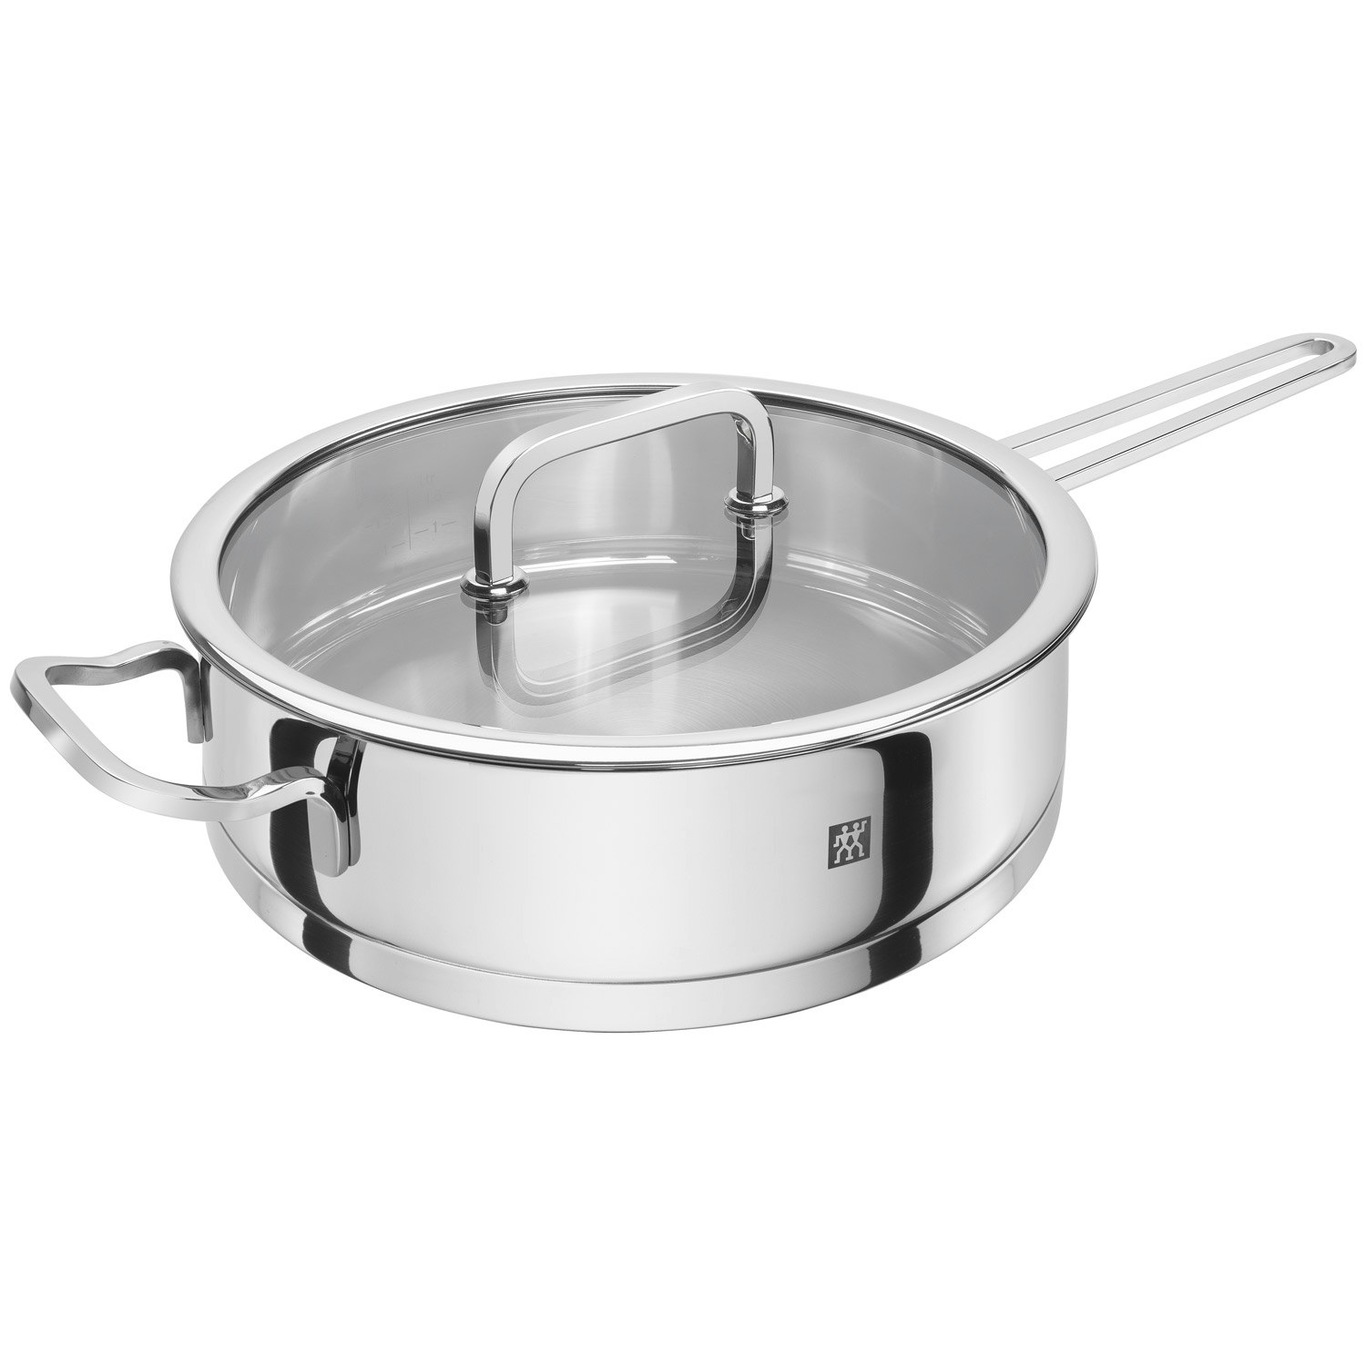 Moment Saute Pan With Glass Ø24x10 cm - Zwilling RoyalDesign